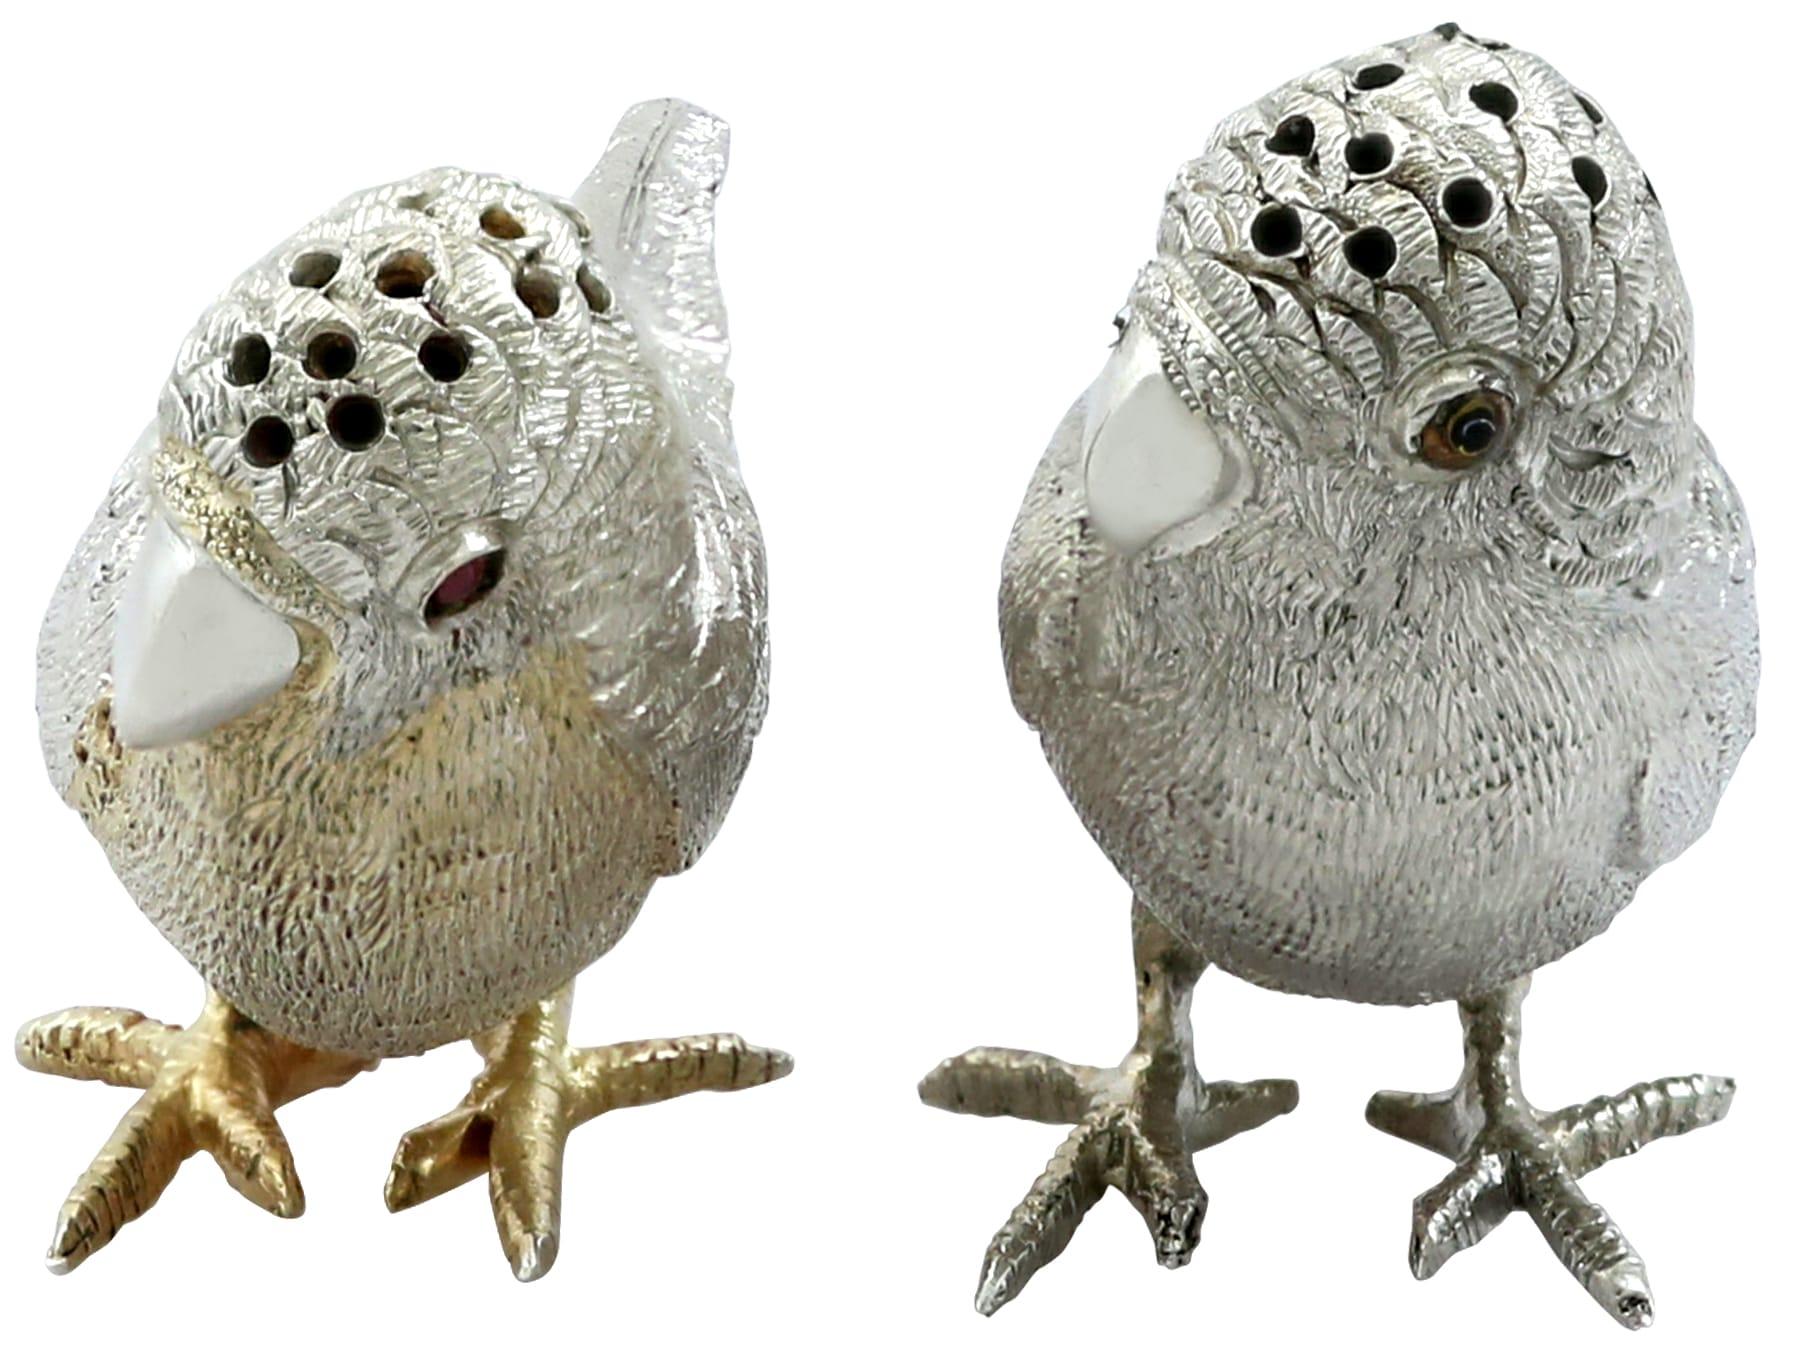 Edwardian Sterling Silver Budgerigar Pepper Shakers In Excellent Condition For Sale In Jesmond, Newcastle Upon Tyne